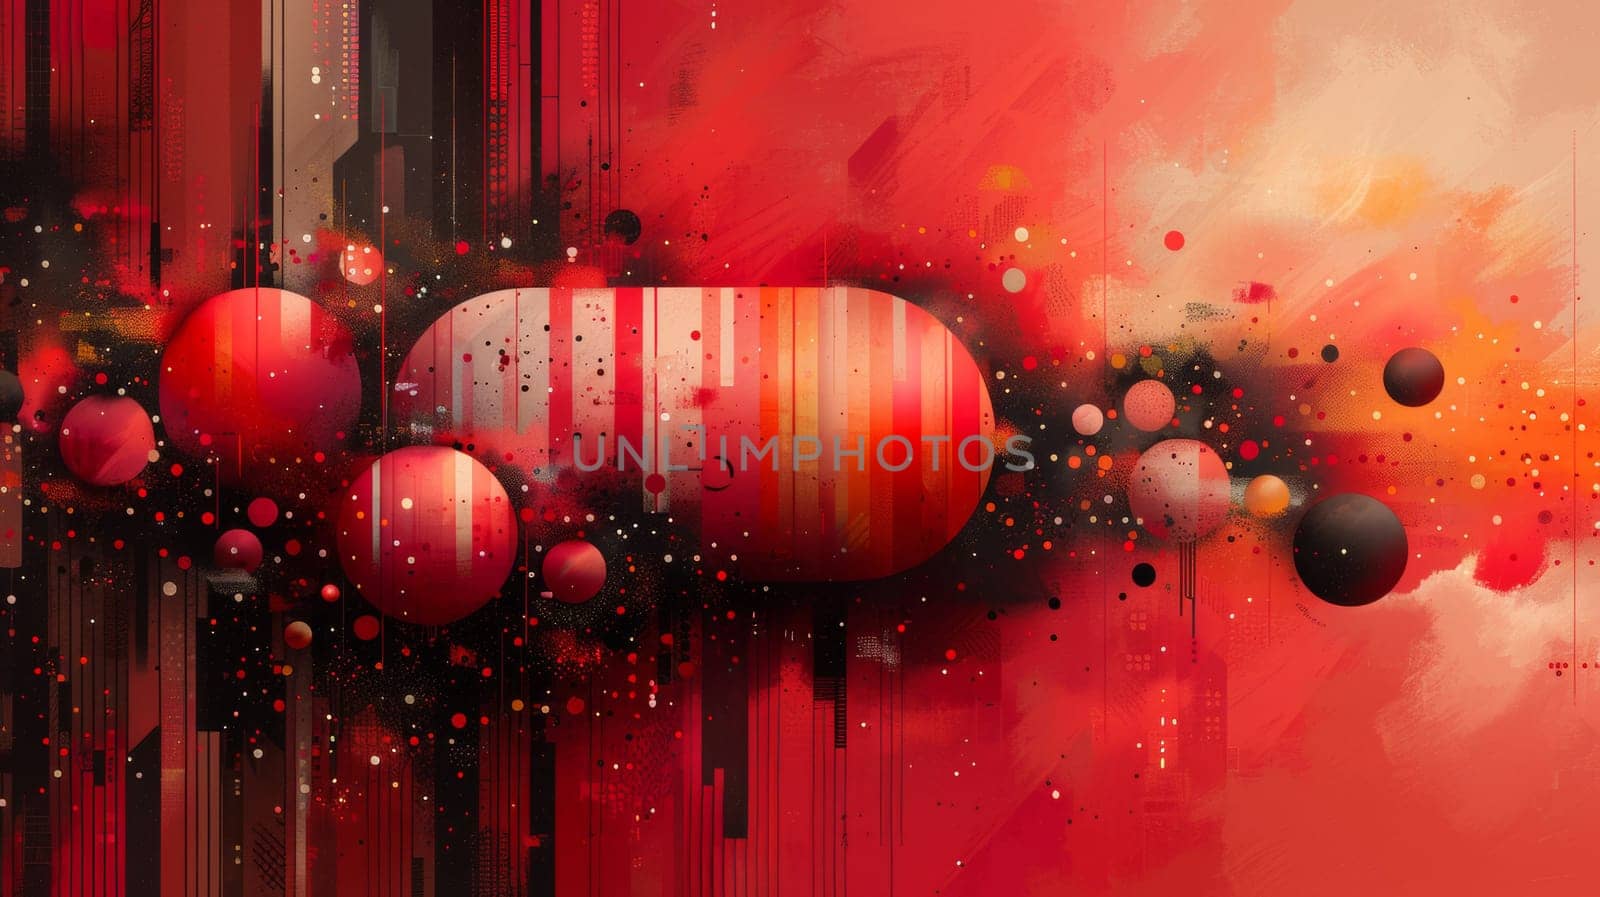 A painting of a red and orange abstract design with dots, AI by starush